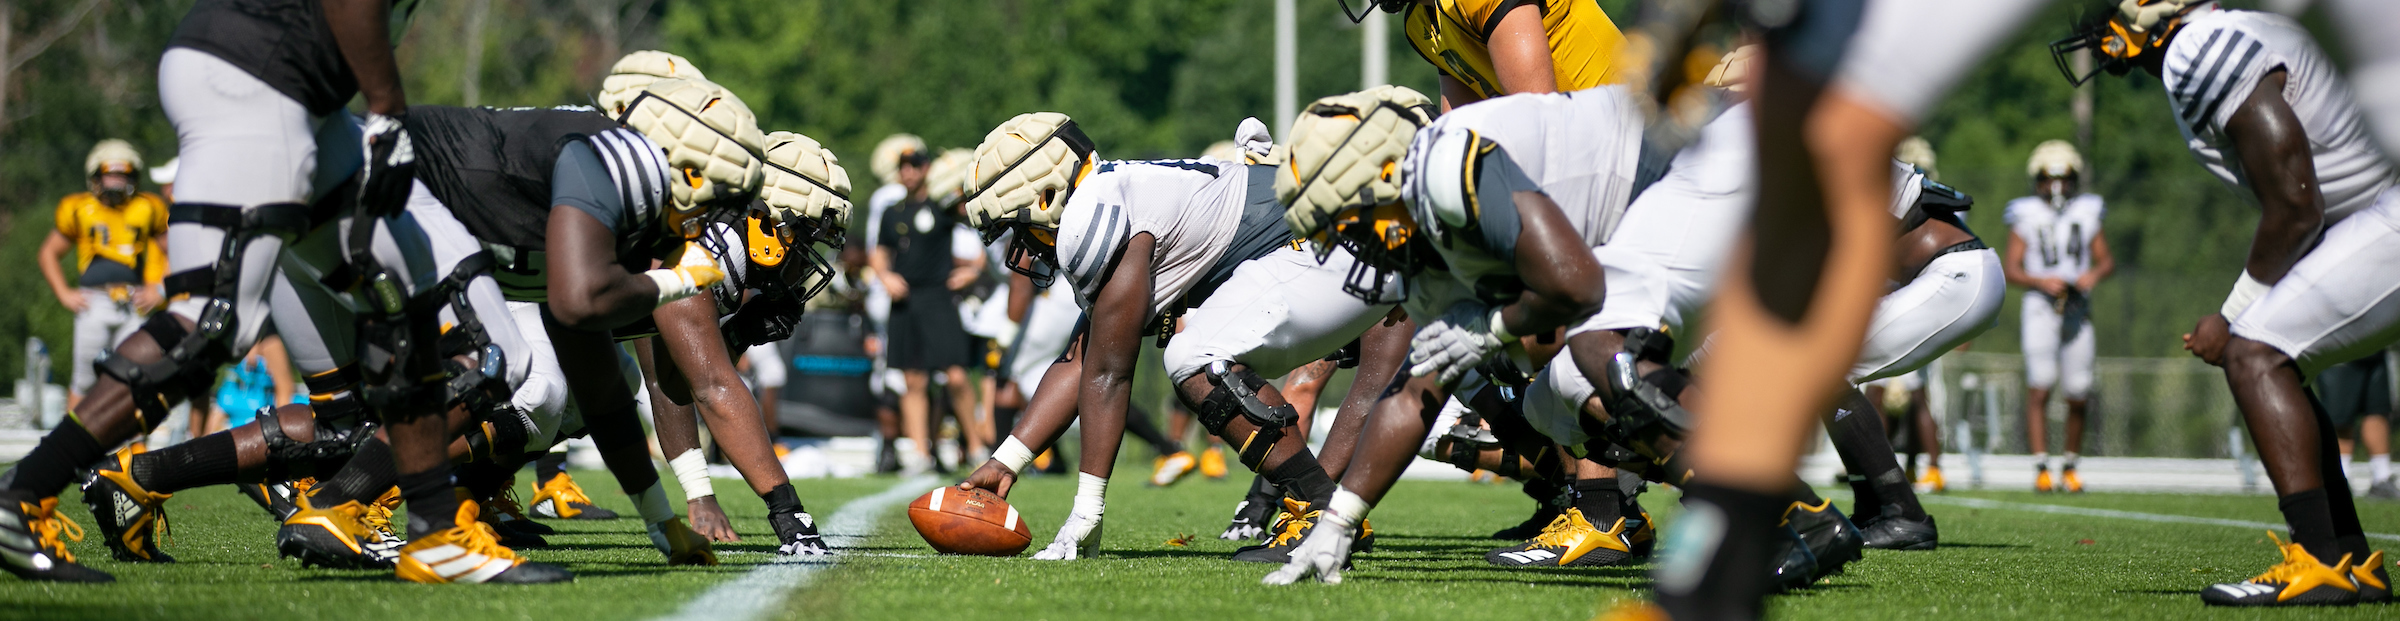 Kennesaw State University football practice at The Perch